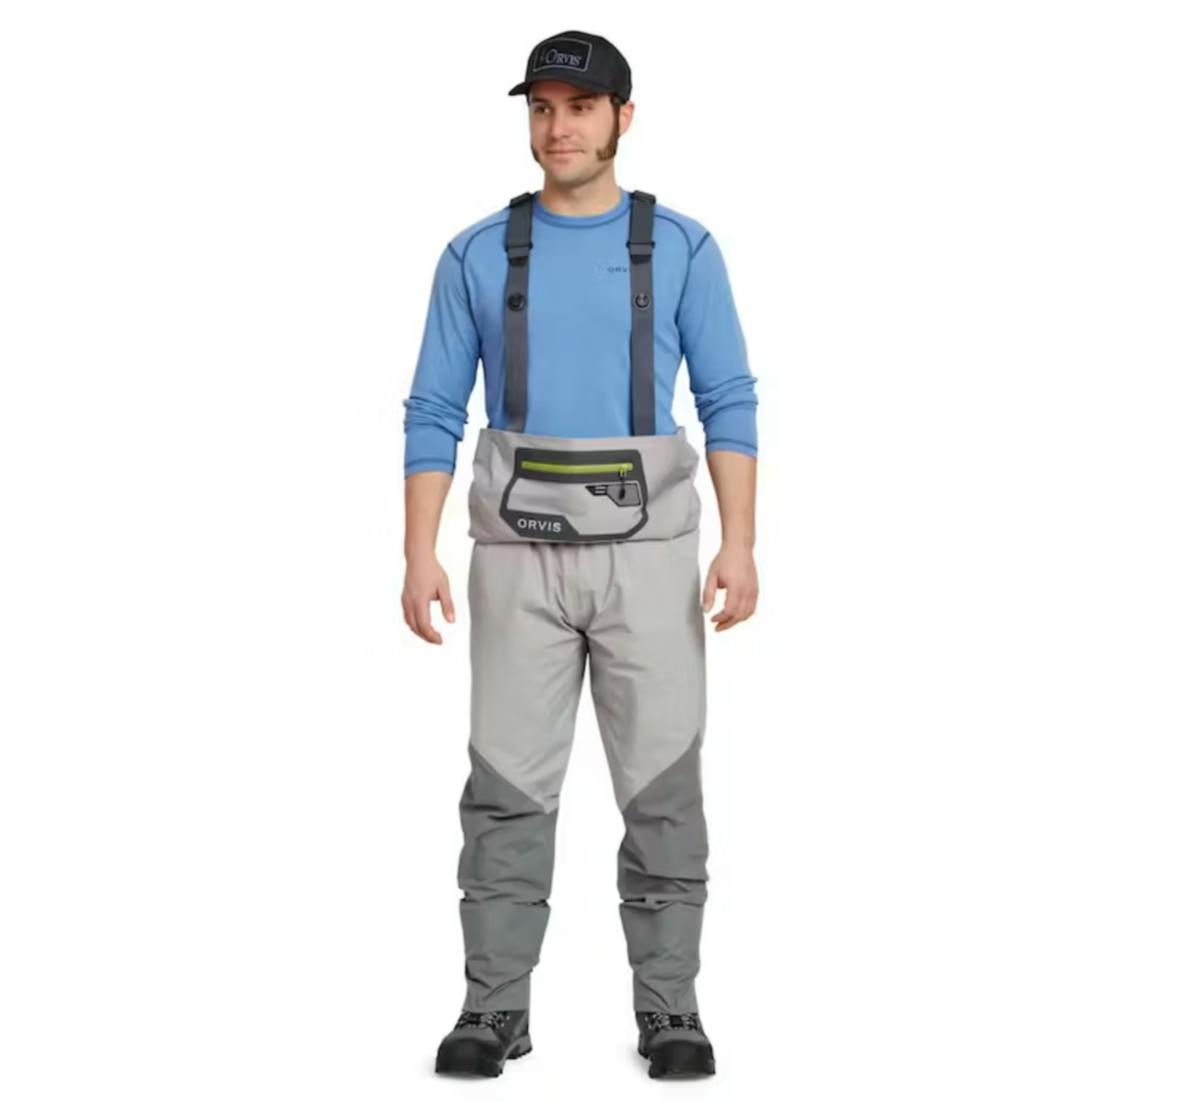 Orvis Waders Size & Fit Guide